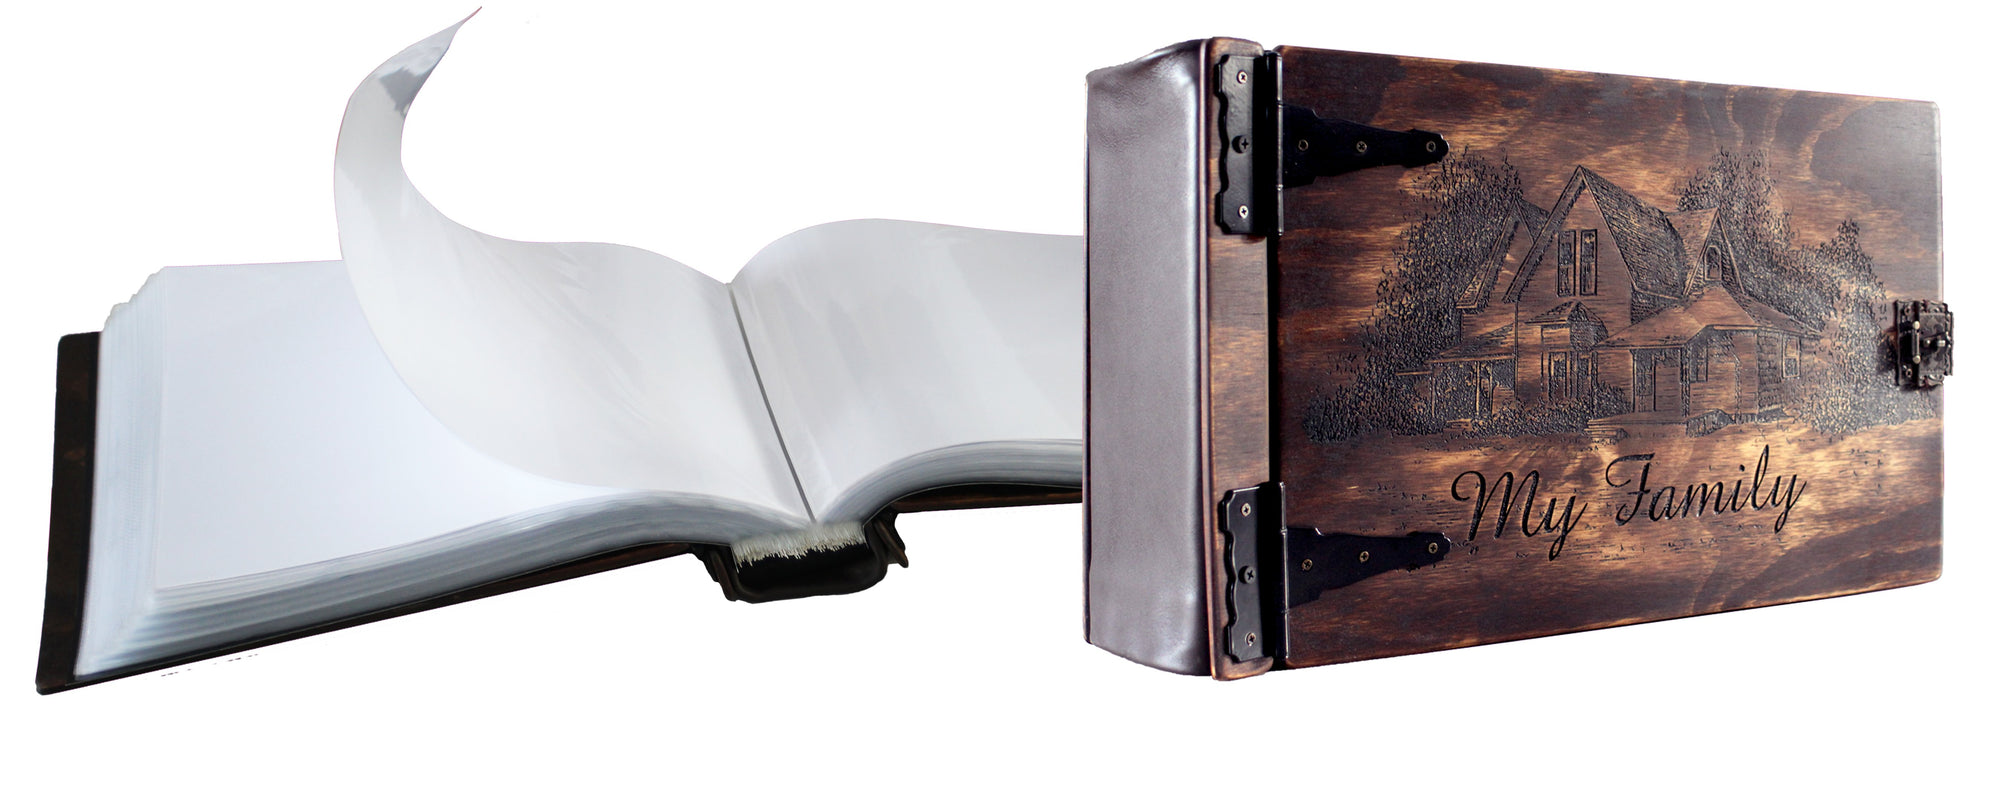 Large Panorama Wooden Books